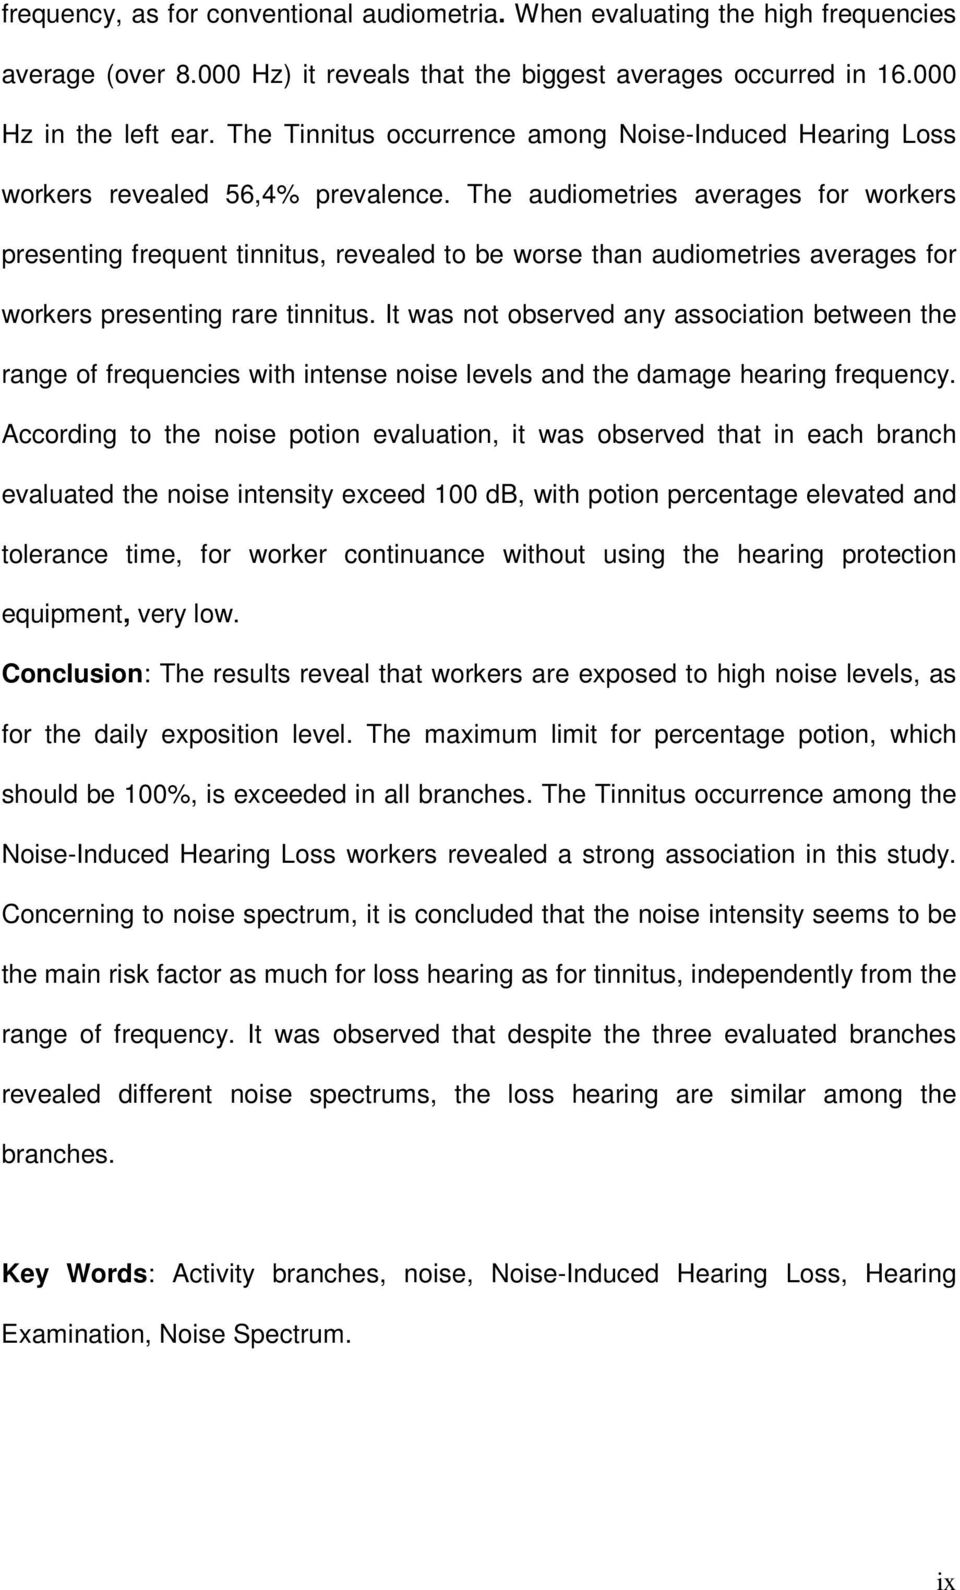 The audiometries averages for workers presenting frequent tinnitus, revealed to be worse than audiometries averages for workers presenting rare tinnitus.